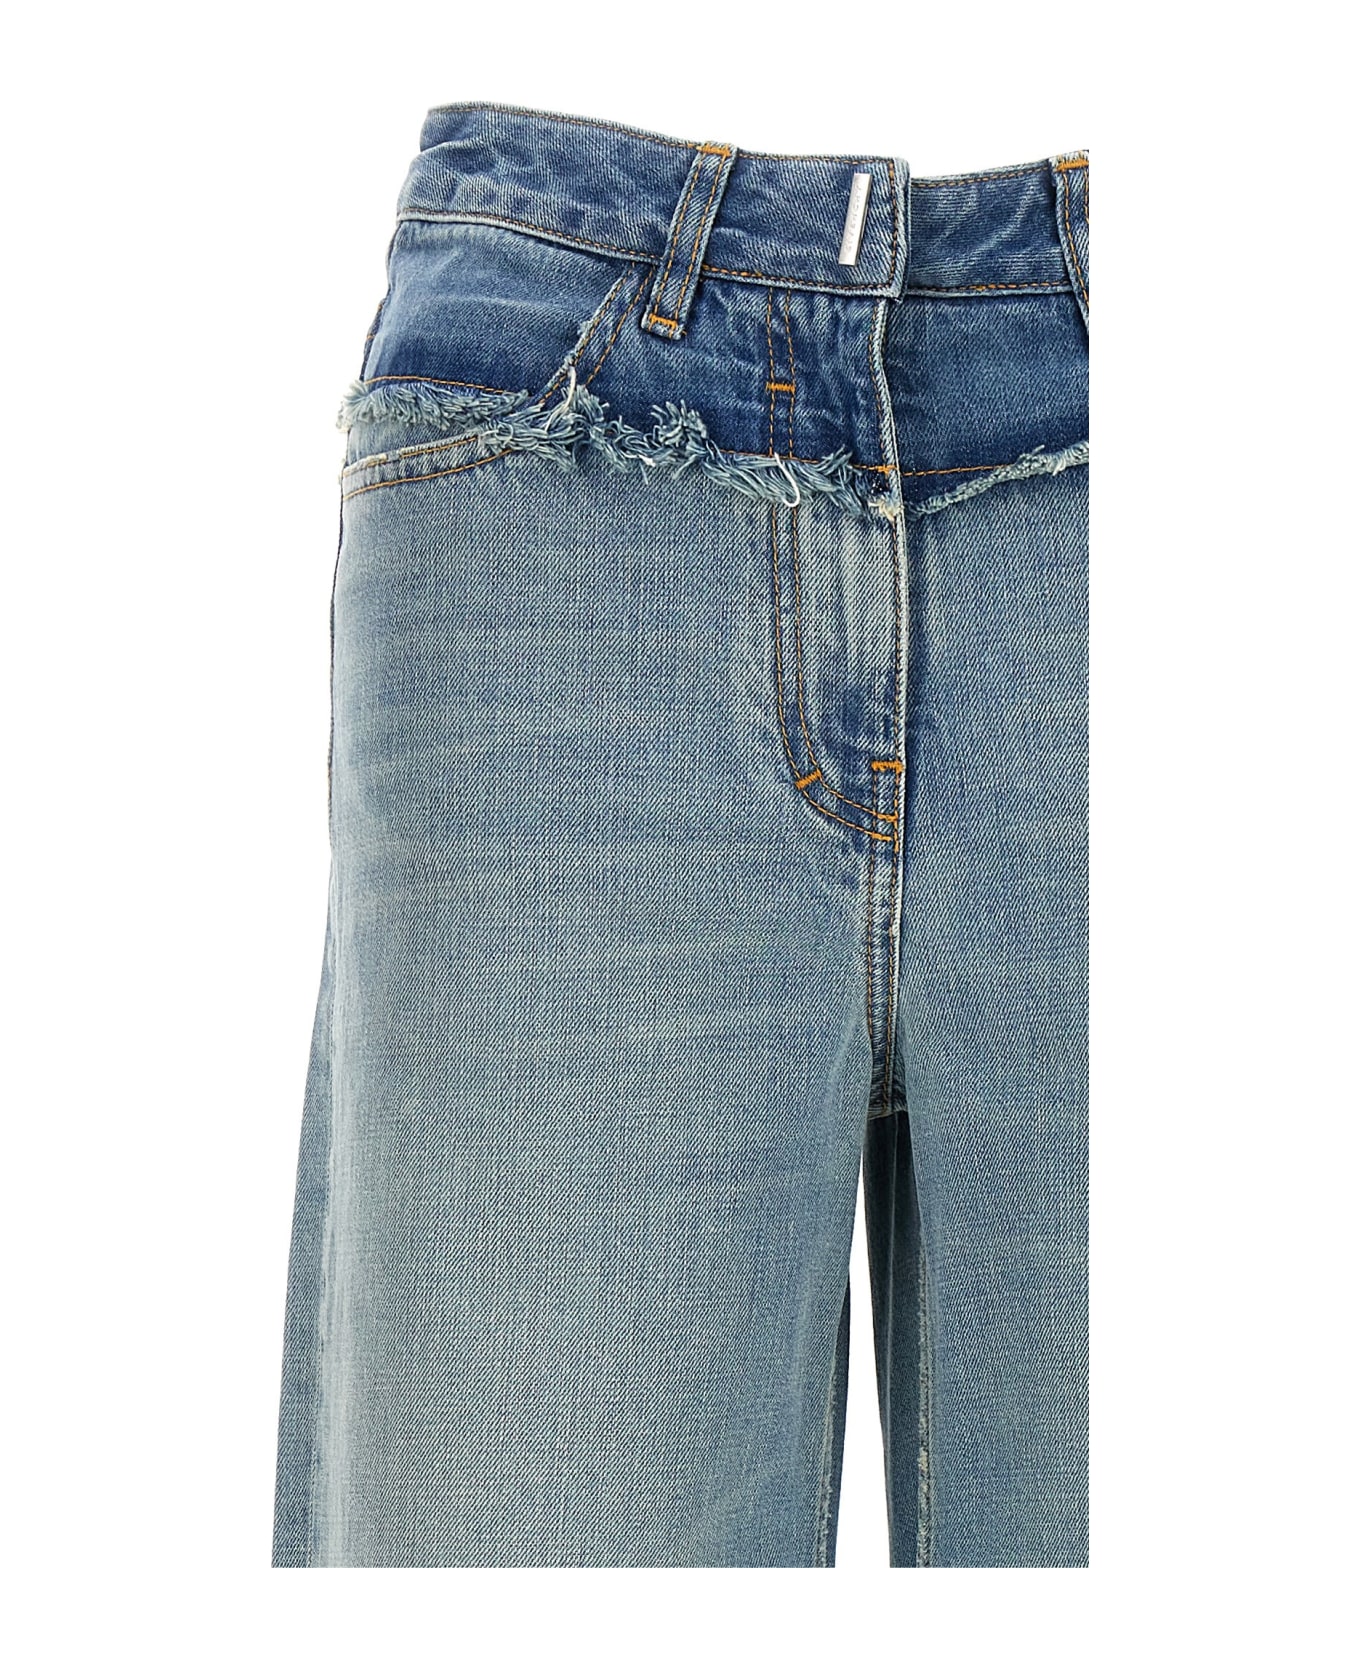 Givenchy Baggy Jeans - Light Blue